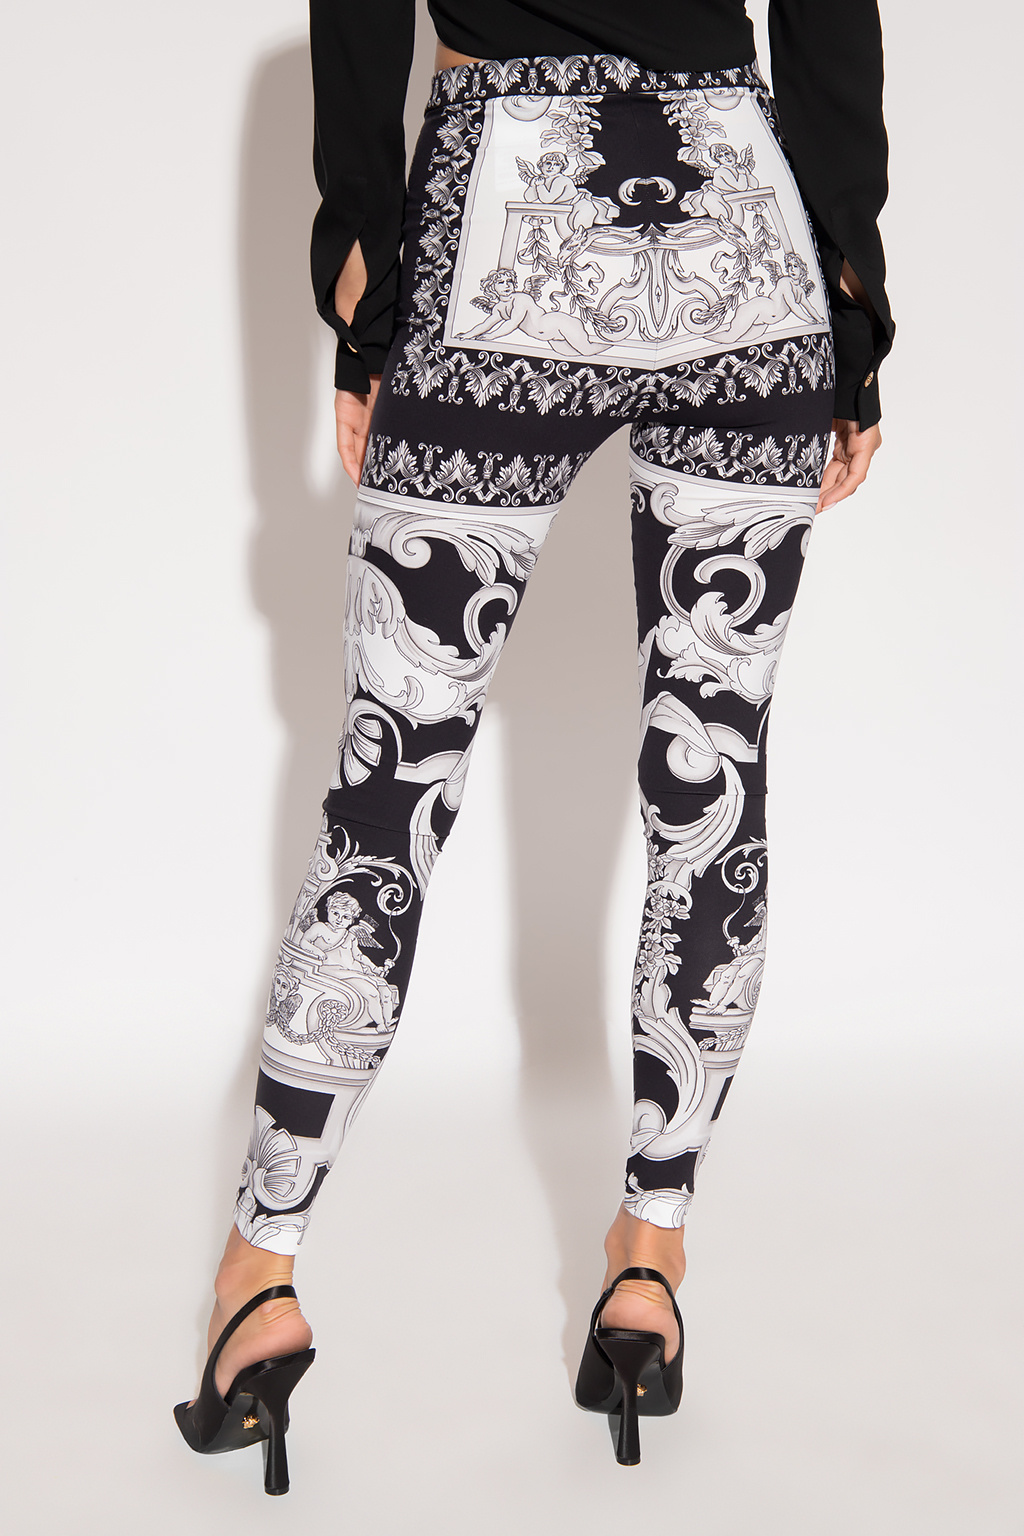 Silver Baroque Embroidery Floral Yoga Leggings for Women with